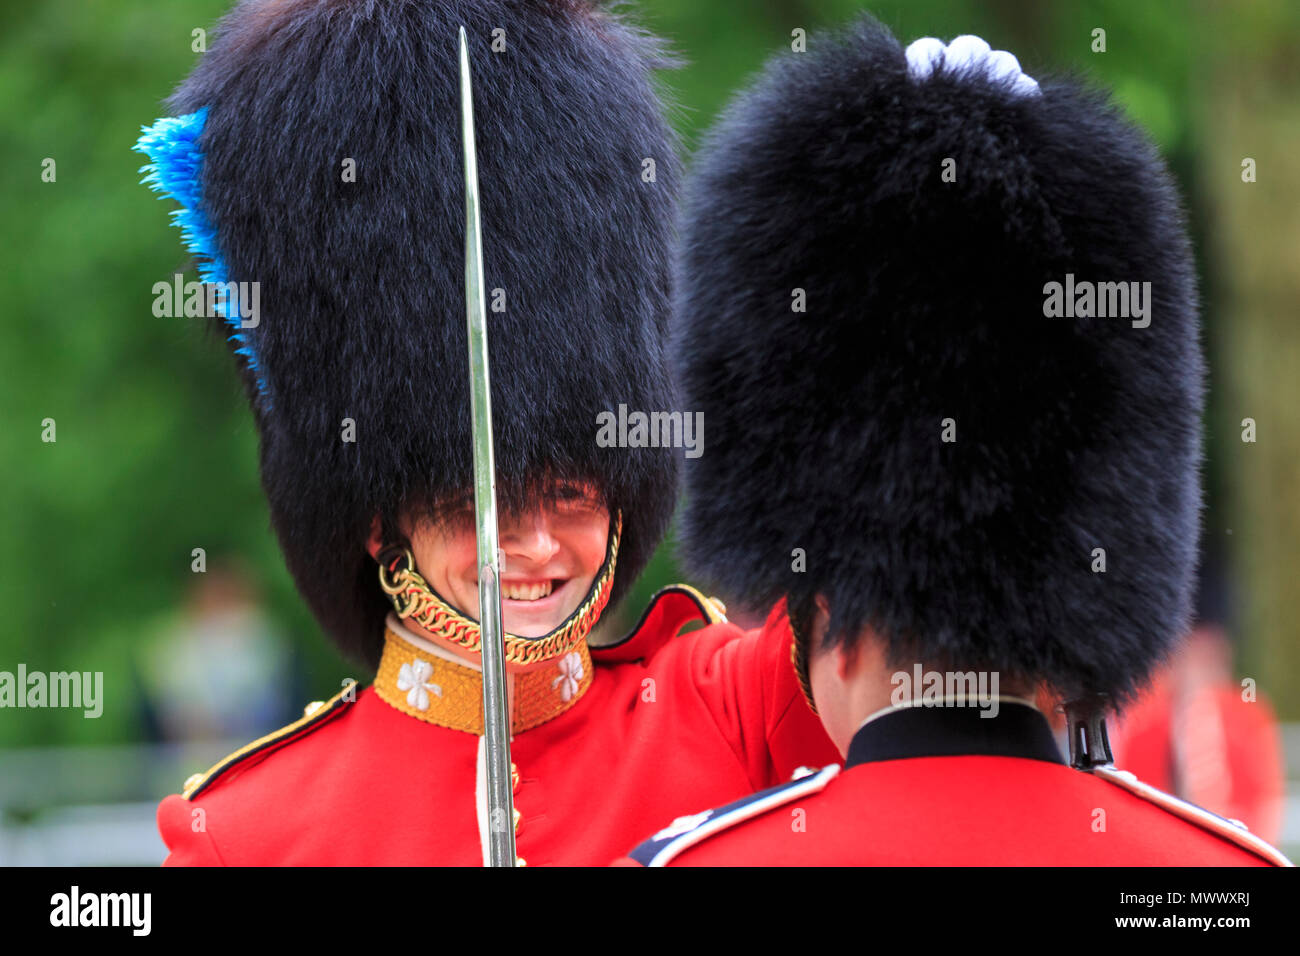 London, UK. 2nd June 2018. A superior inspects one of his soldiers' uniform detail and checks the posture. Londoners and tourists enjoy watching the procession and display of pageantry by troops from the Household Division at The Colonel's Review of Trooping the Colour on the Mall in Westminster. The Colonel's Review is the second and final full public rehearsal of Trooping the Colour, one week before the Queen's Birthday Parade. It takes place along The Mall and at Horse Guards Parade. Credit: Imageplotter News and Sports/Alamy Live News Stock Photo